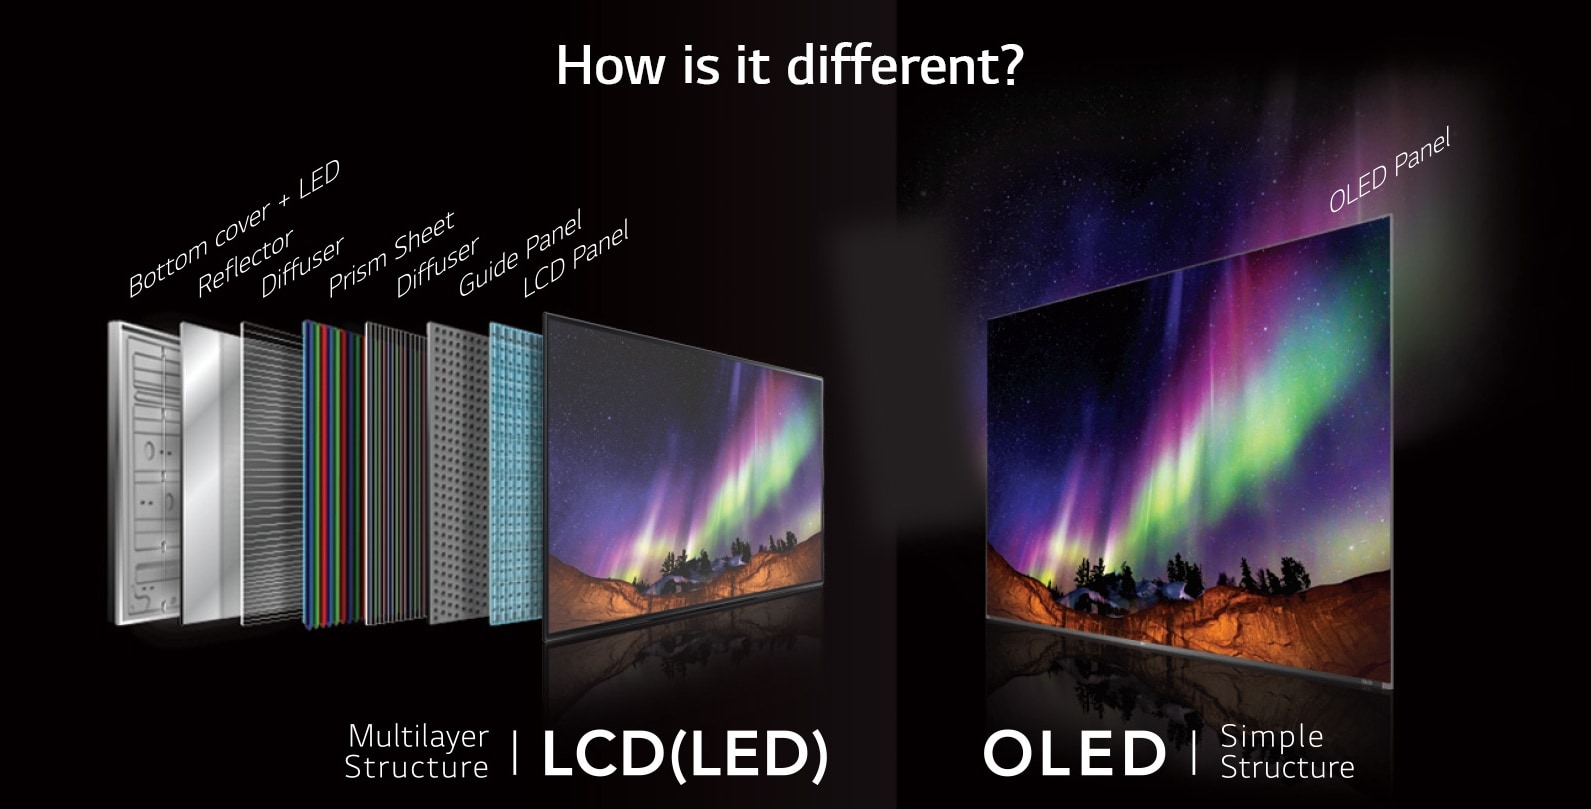 How OLED technology works